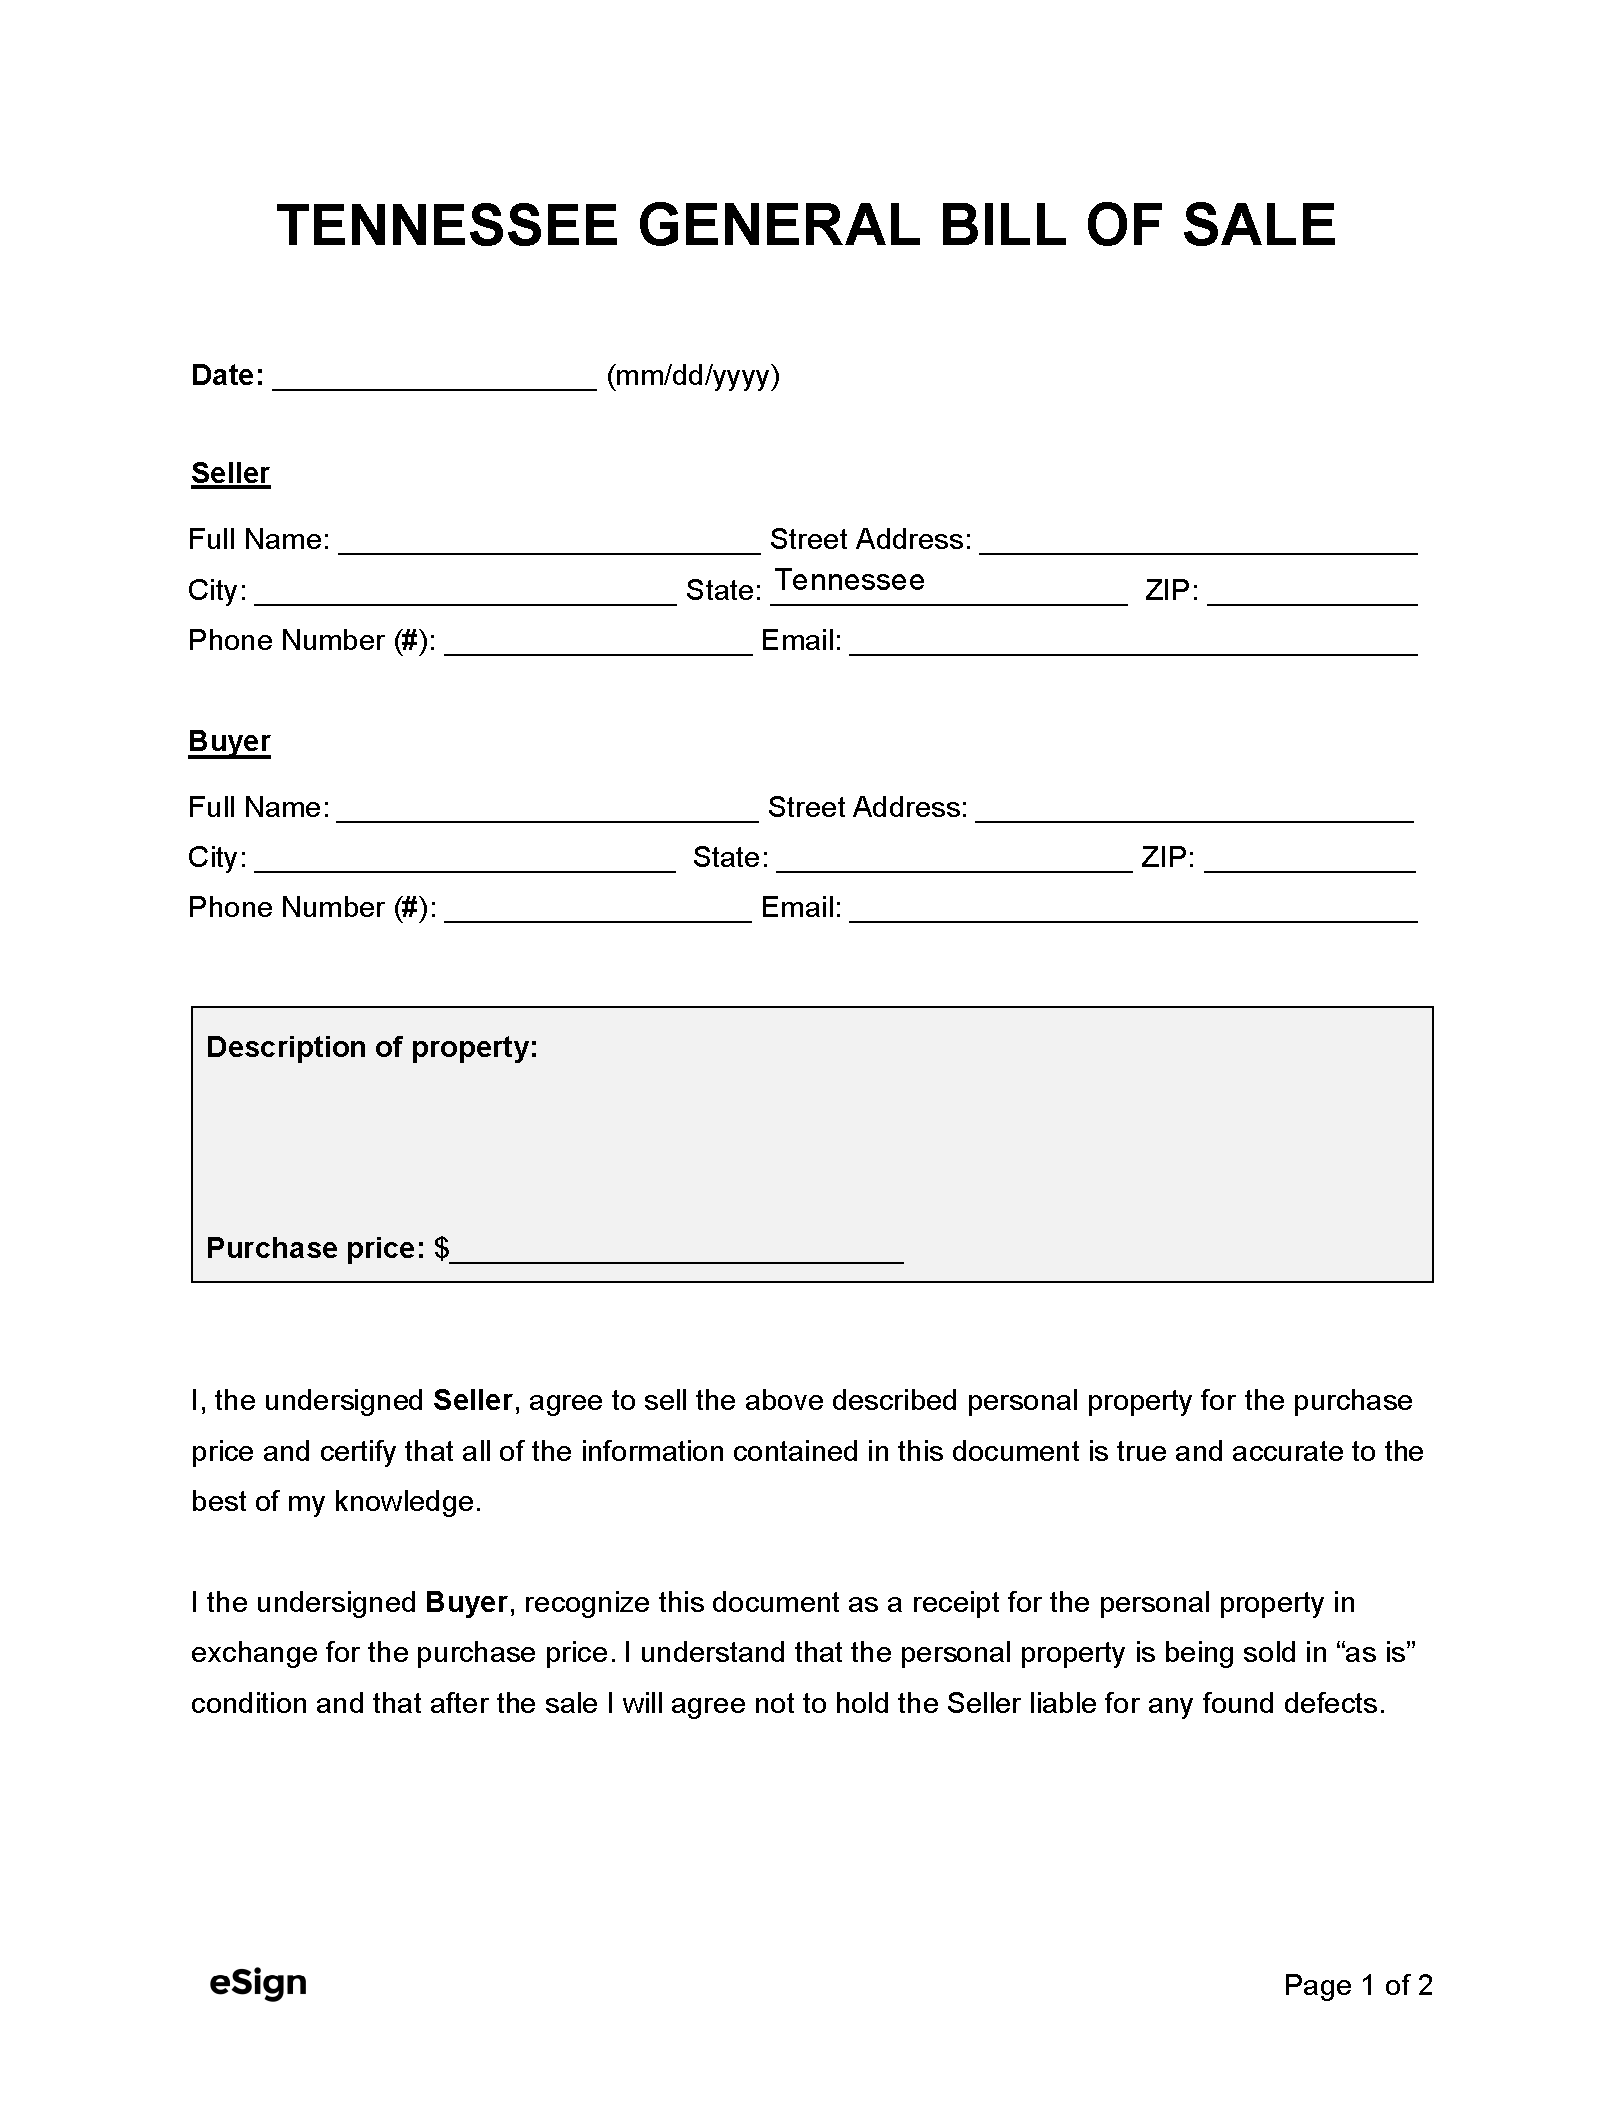 Free Tennessee Bill of Sale Forms - PDF | Word